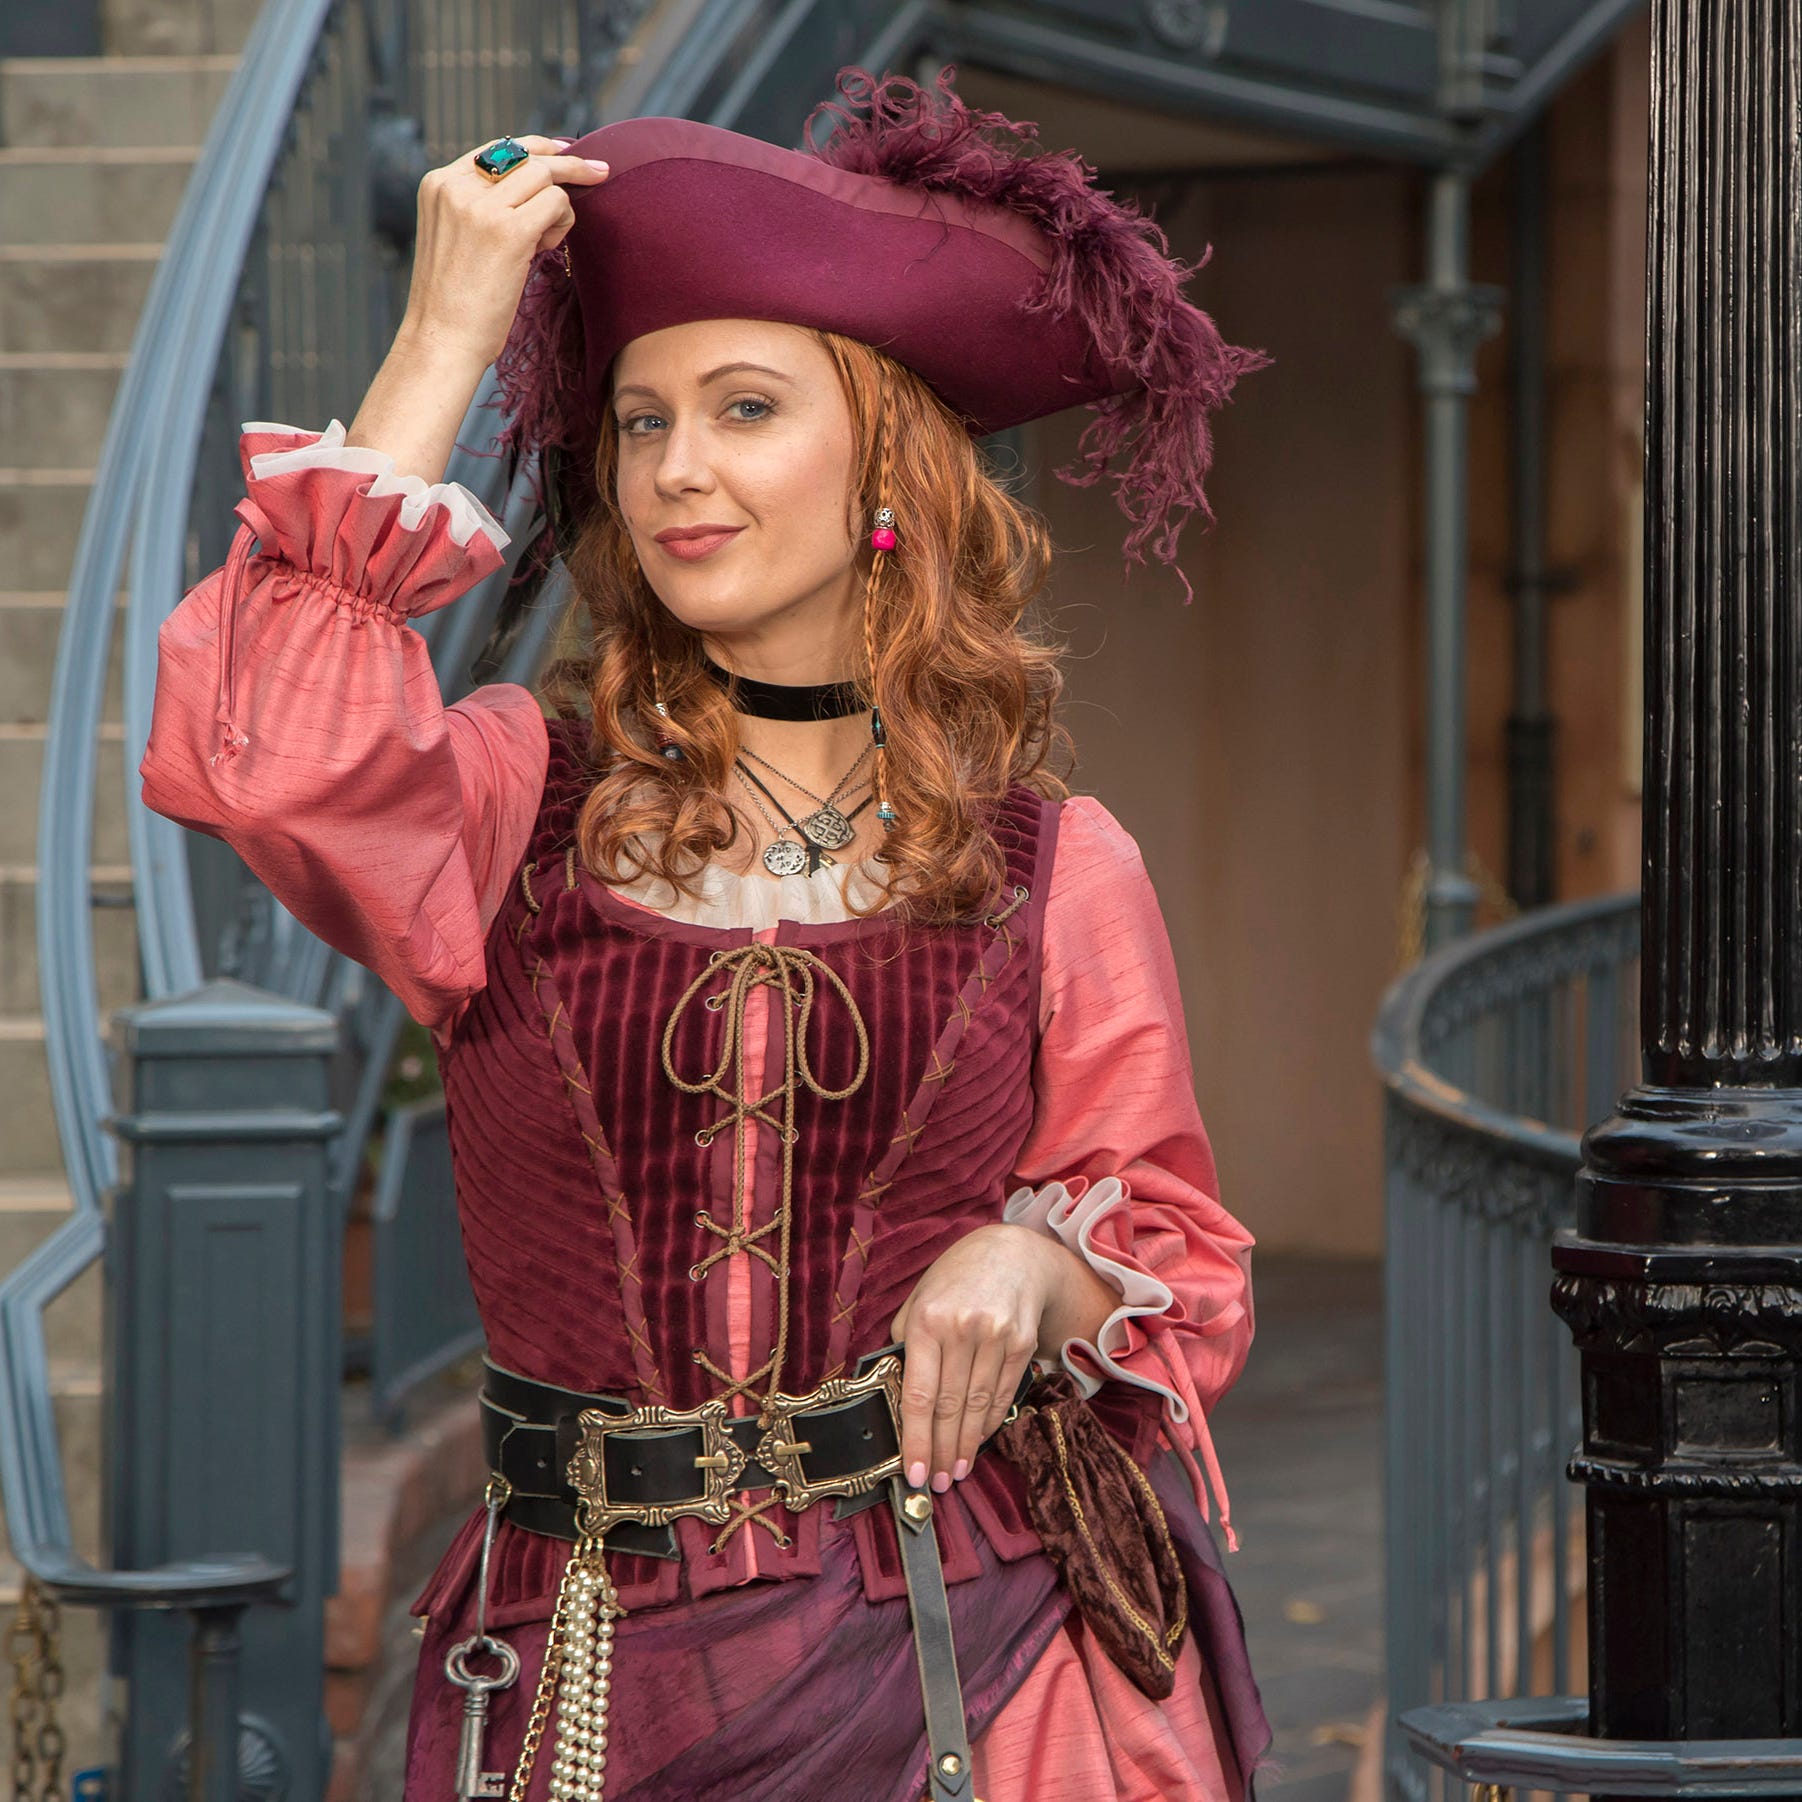 REDD SAILS INTO DISNEYLAND PARK THIS SUMMER (Anaheim, Calif.) – Arriving this summer at Disneyland Park is a fierce and independent pirate known as Redd. A bit mysterious by nature, Redd travels to various ports throughout the Caribbean—selling rum a